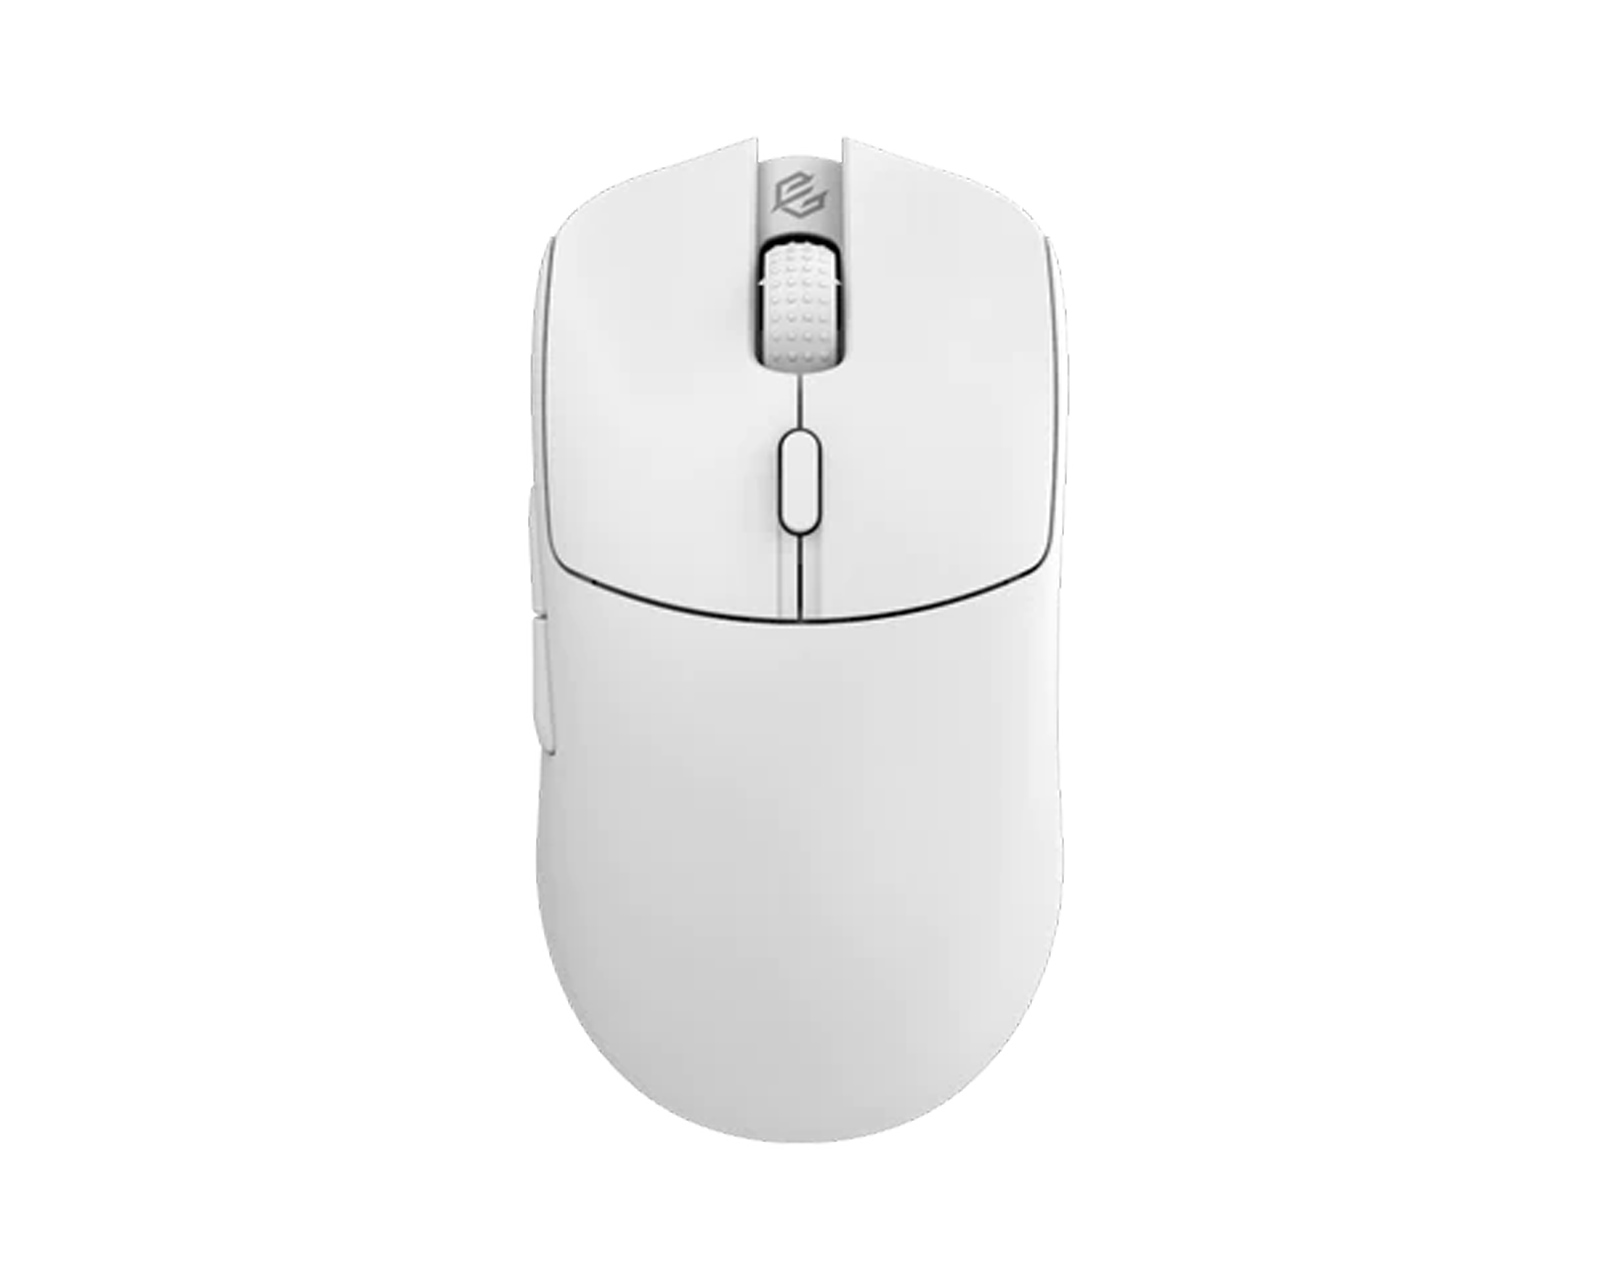 G-Wolves HTX 4K Wireless Gaming Mouse - White - us.MaxGaming.com